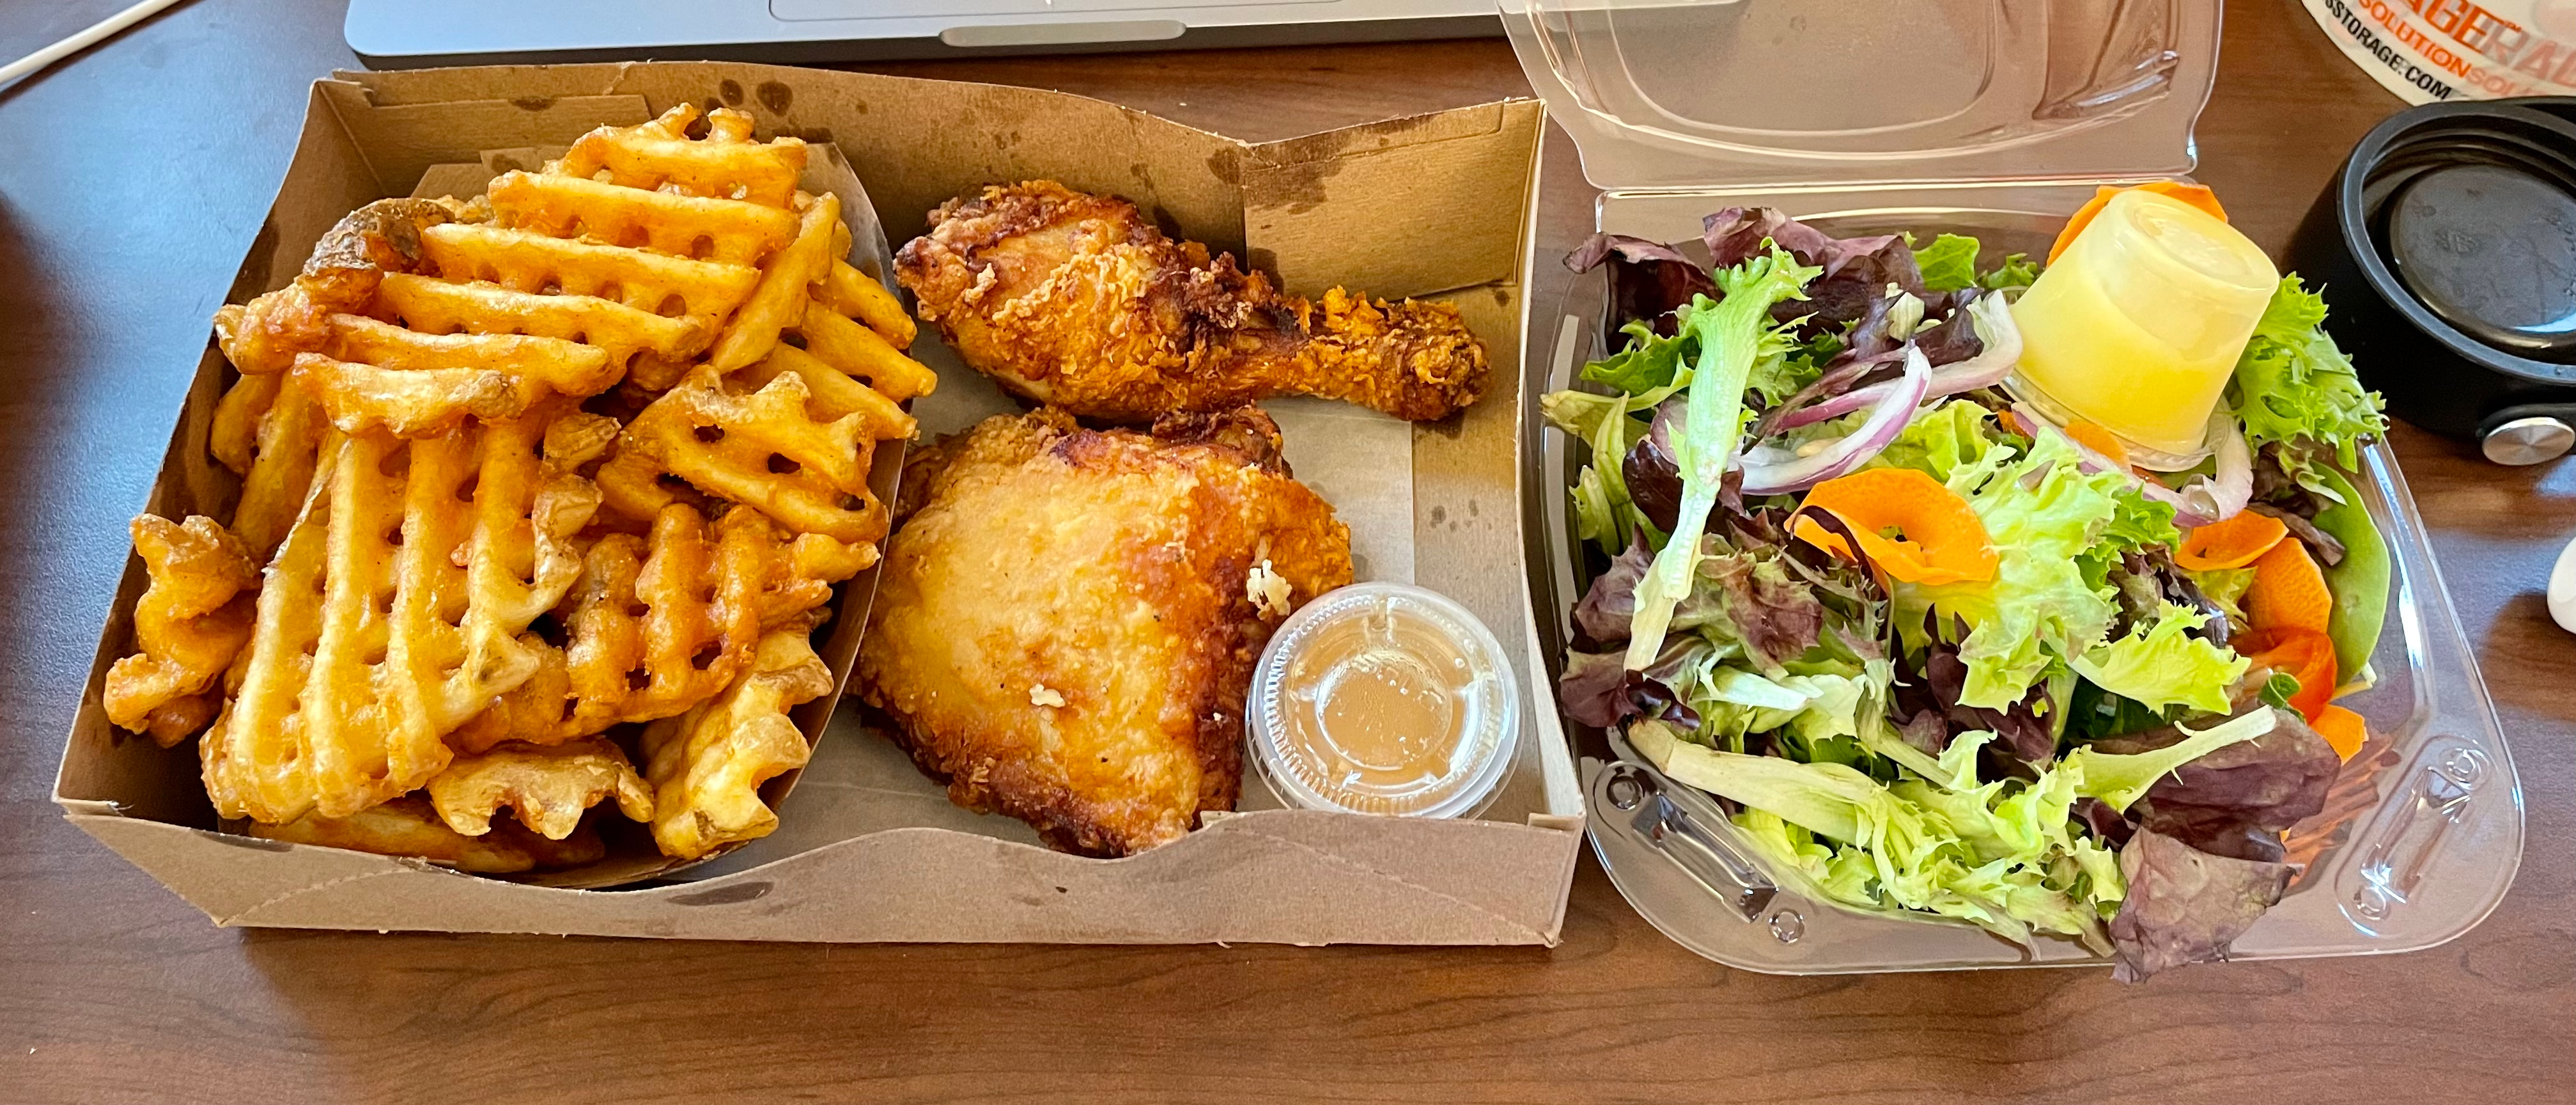 2pc Meal with Waffle Fries and House Salad; $13.75